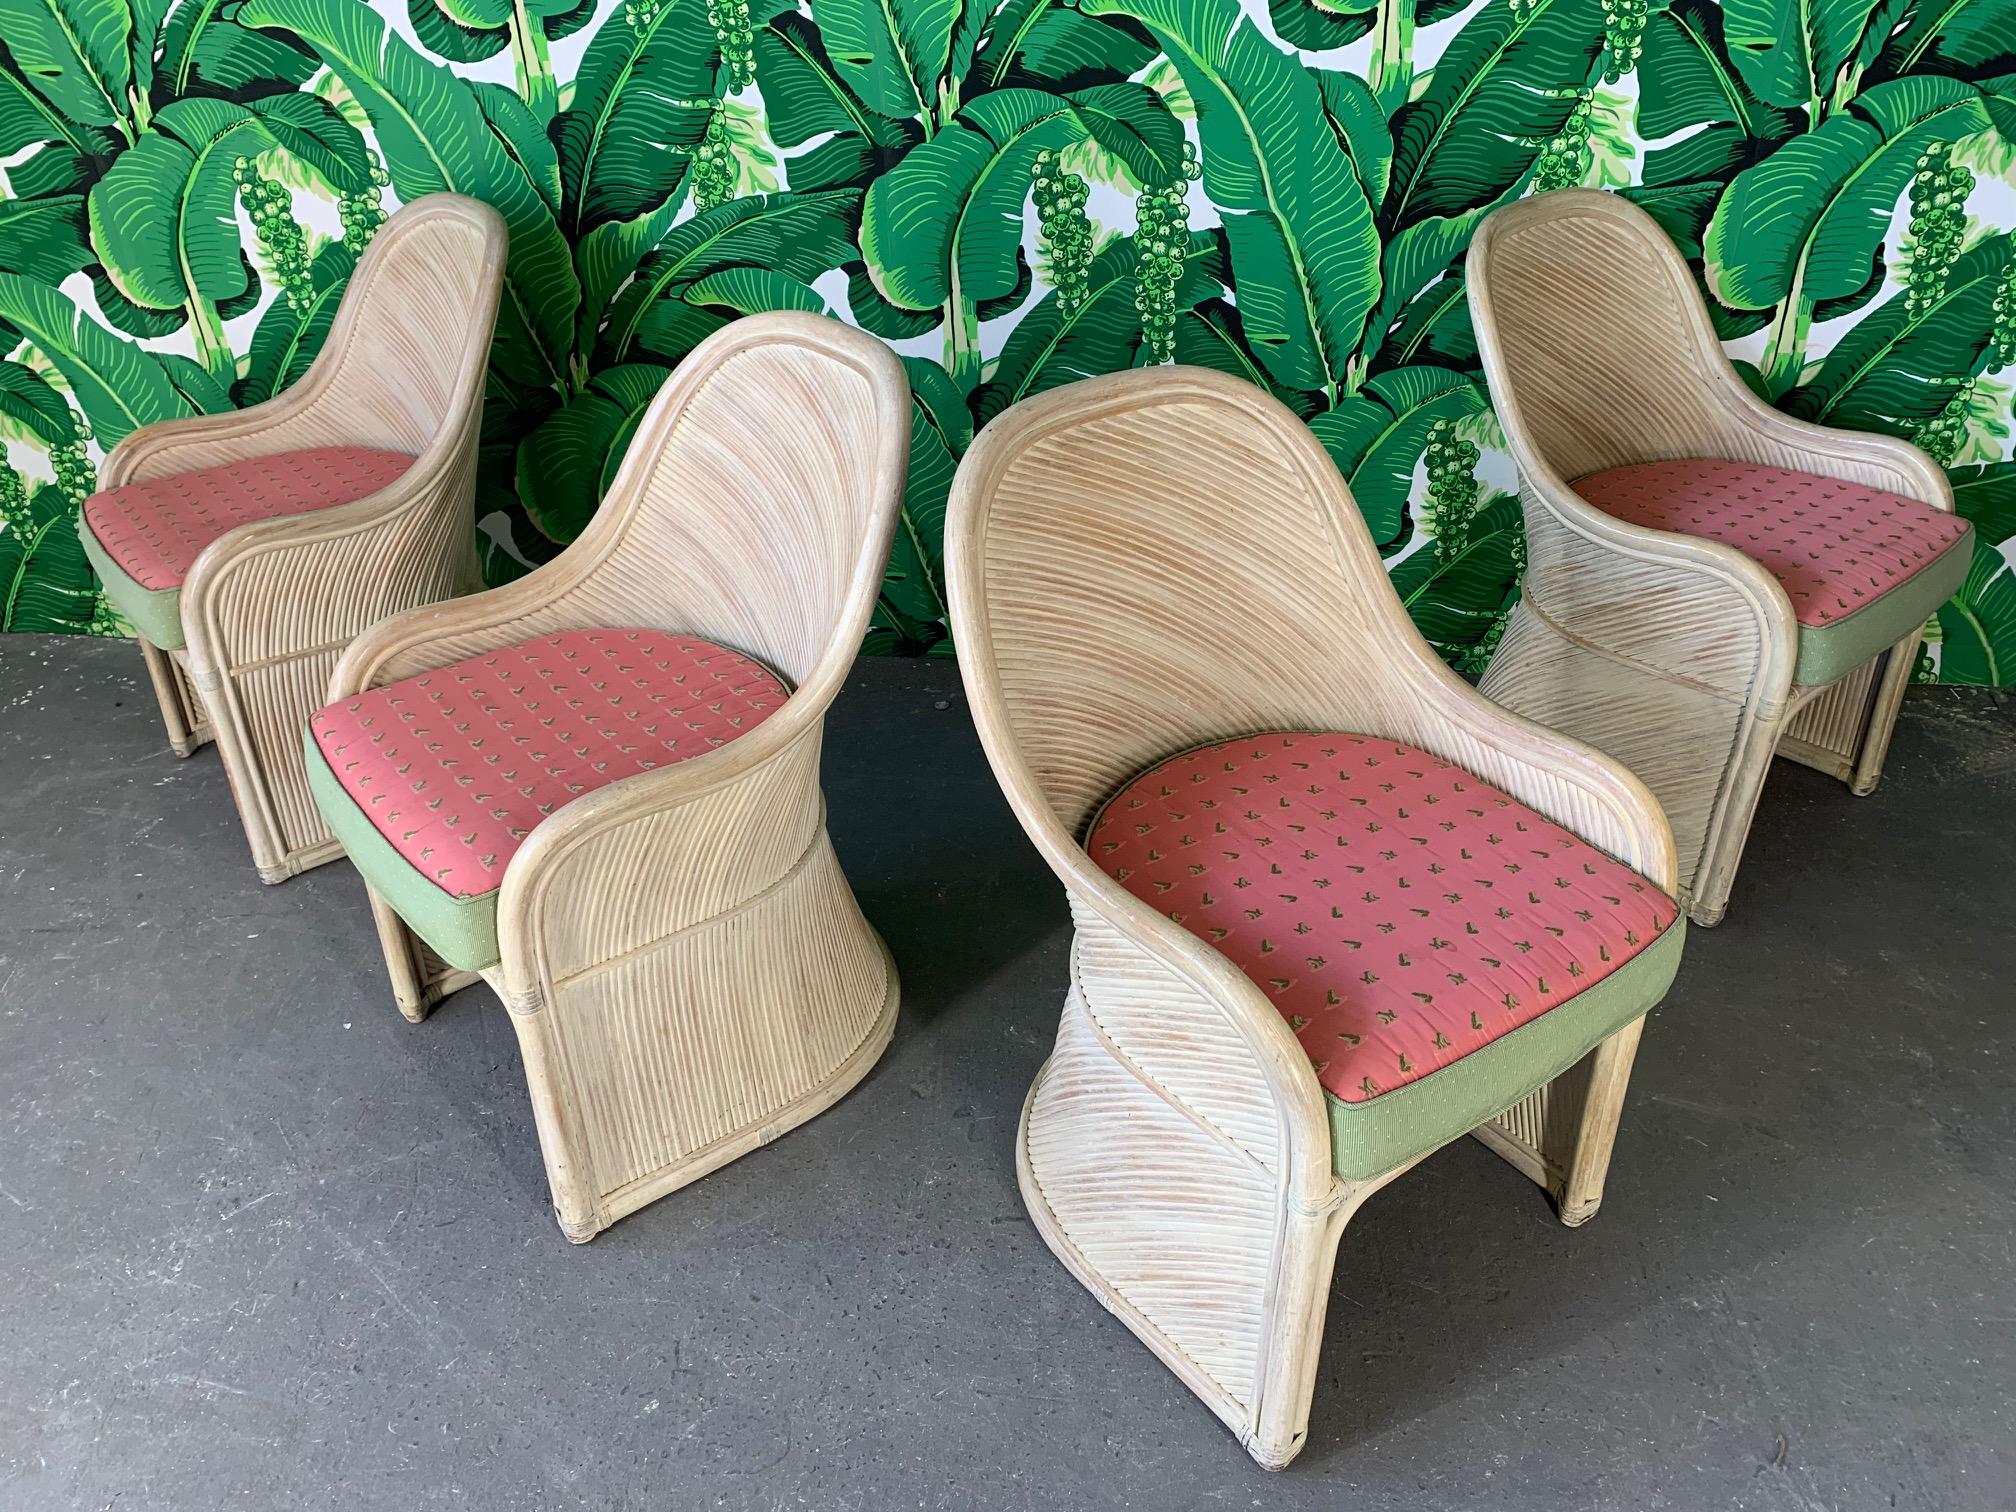 Set of 4 dining chairs by Henry Link feature unique sculptural shape and wrapped in split reed rattan in an artistic pattern after Gabriella Crespi. Very good condition with minor imperfections consistent with age. Upholstery in excellent condition.